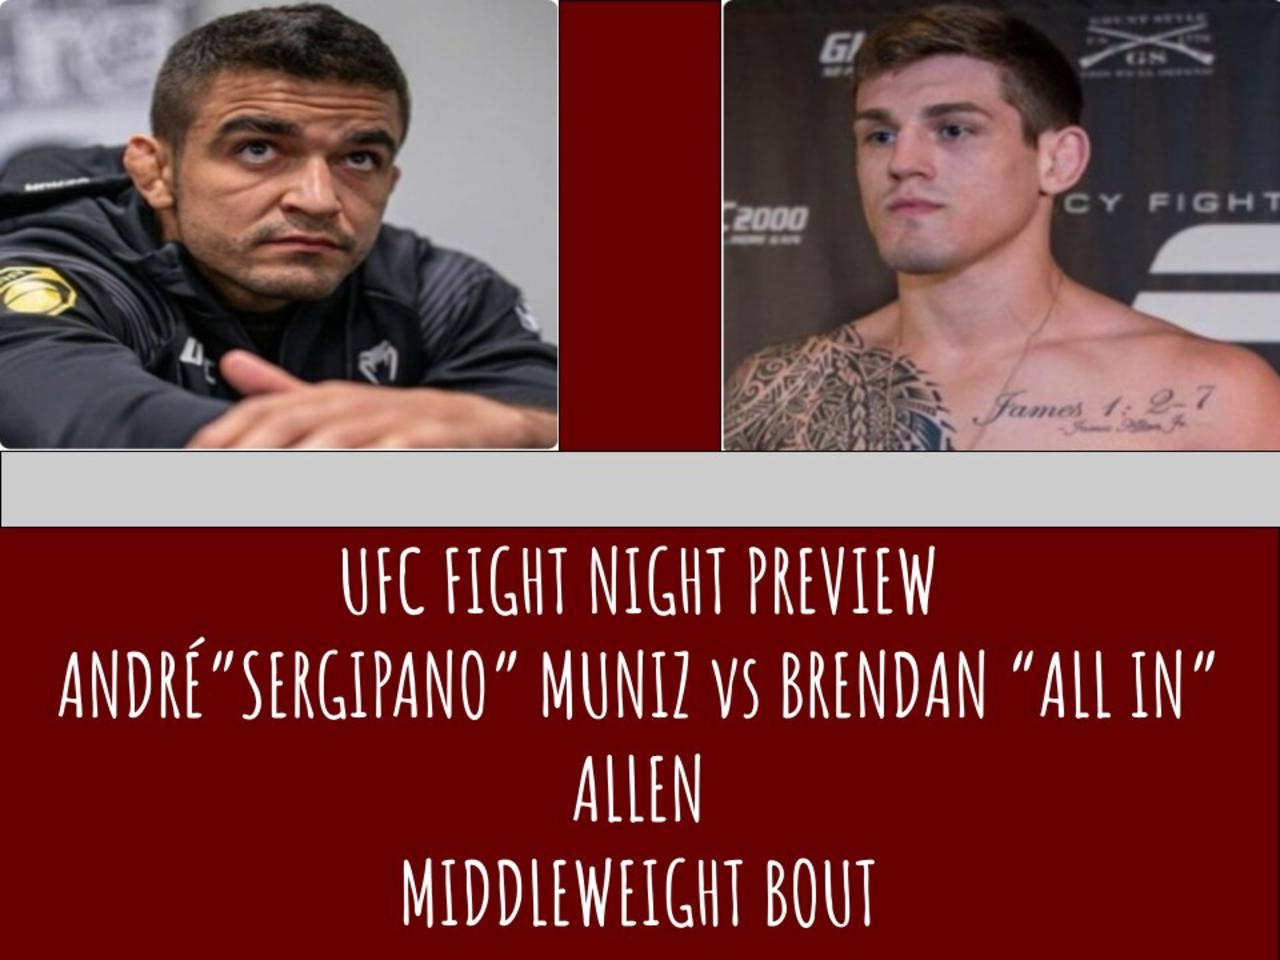 ANDRÉ” SERGIPANO” MUNIZ VS BRENDAN “ALL IN” ALLEN UFC FIGHT NIGHT PREVIEW. WHAT TO EXPECT. WHO WINS?